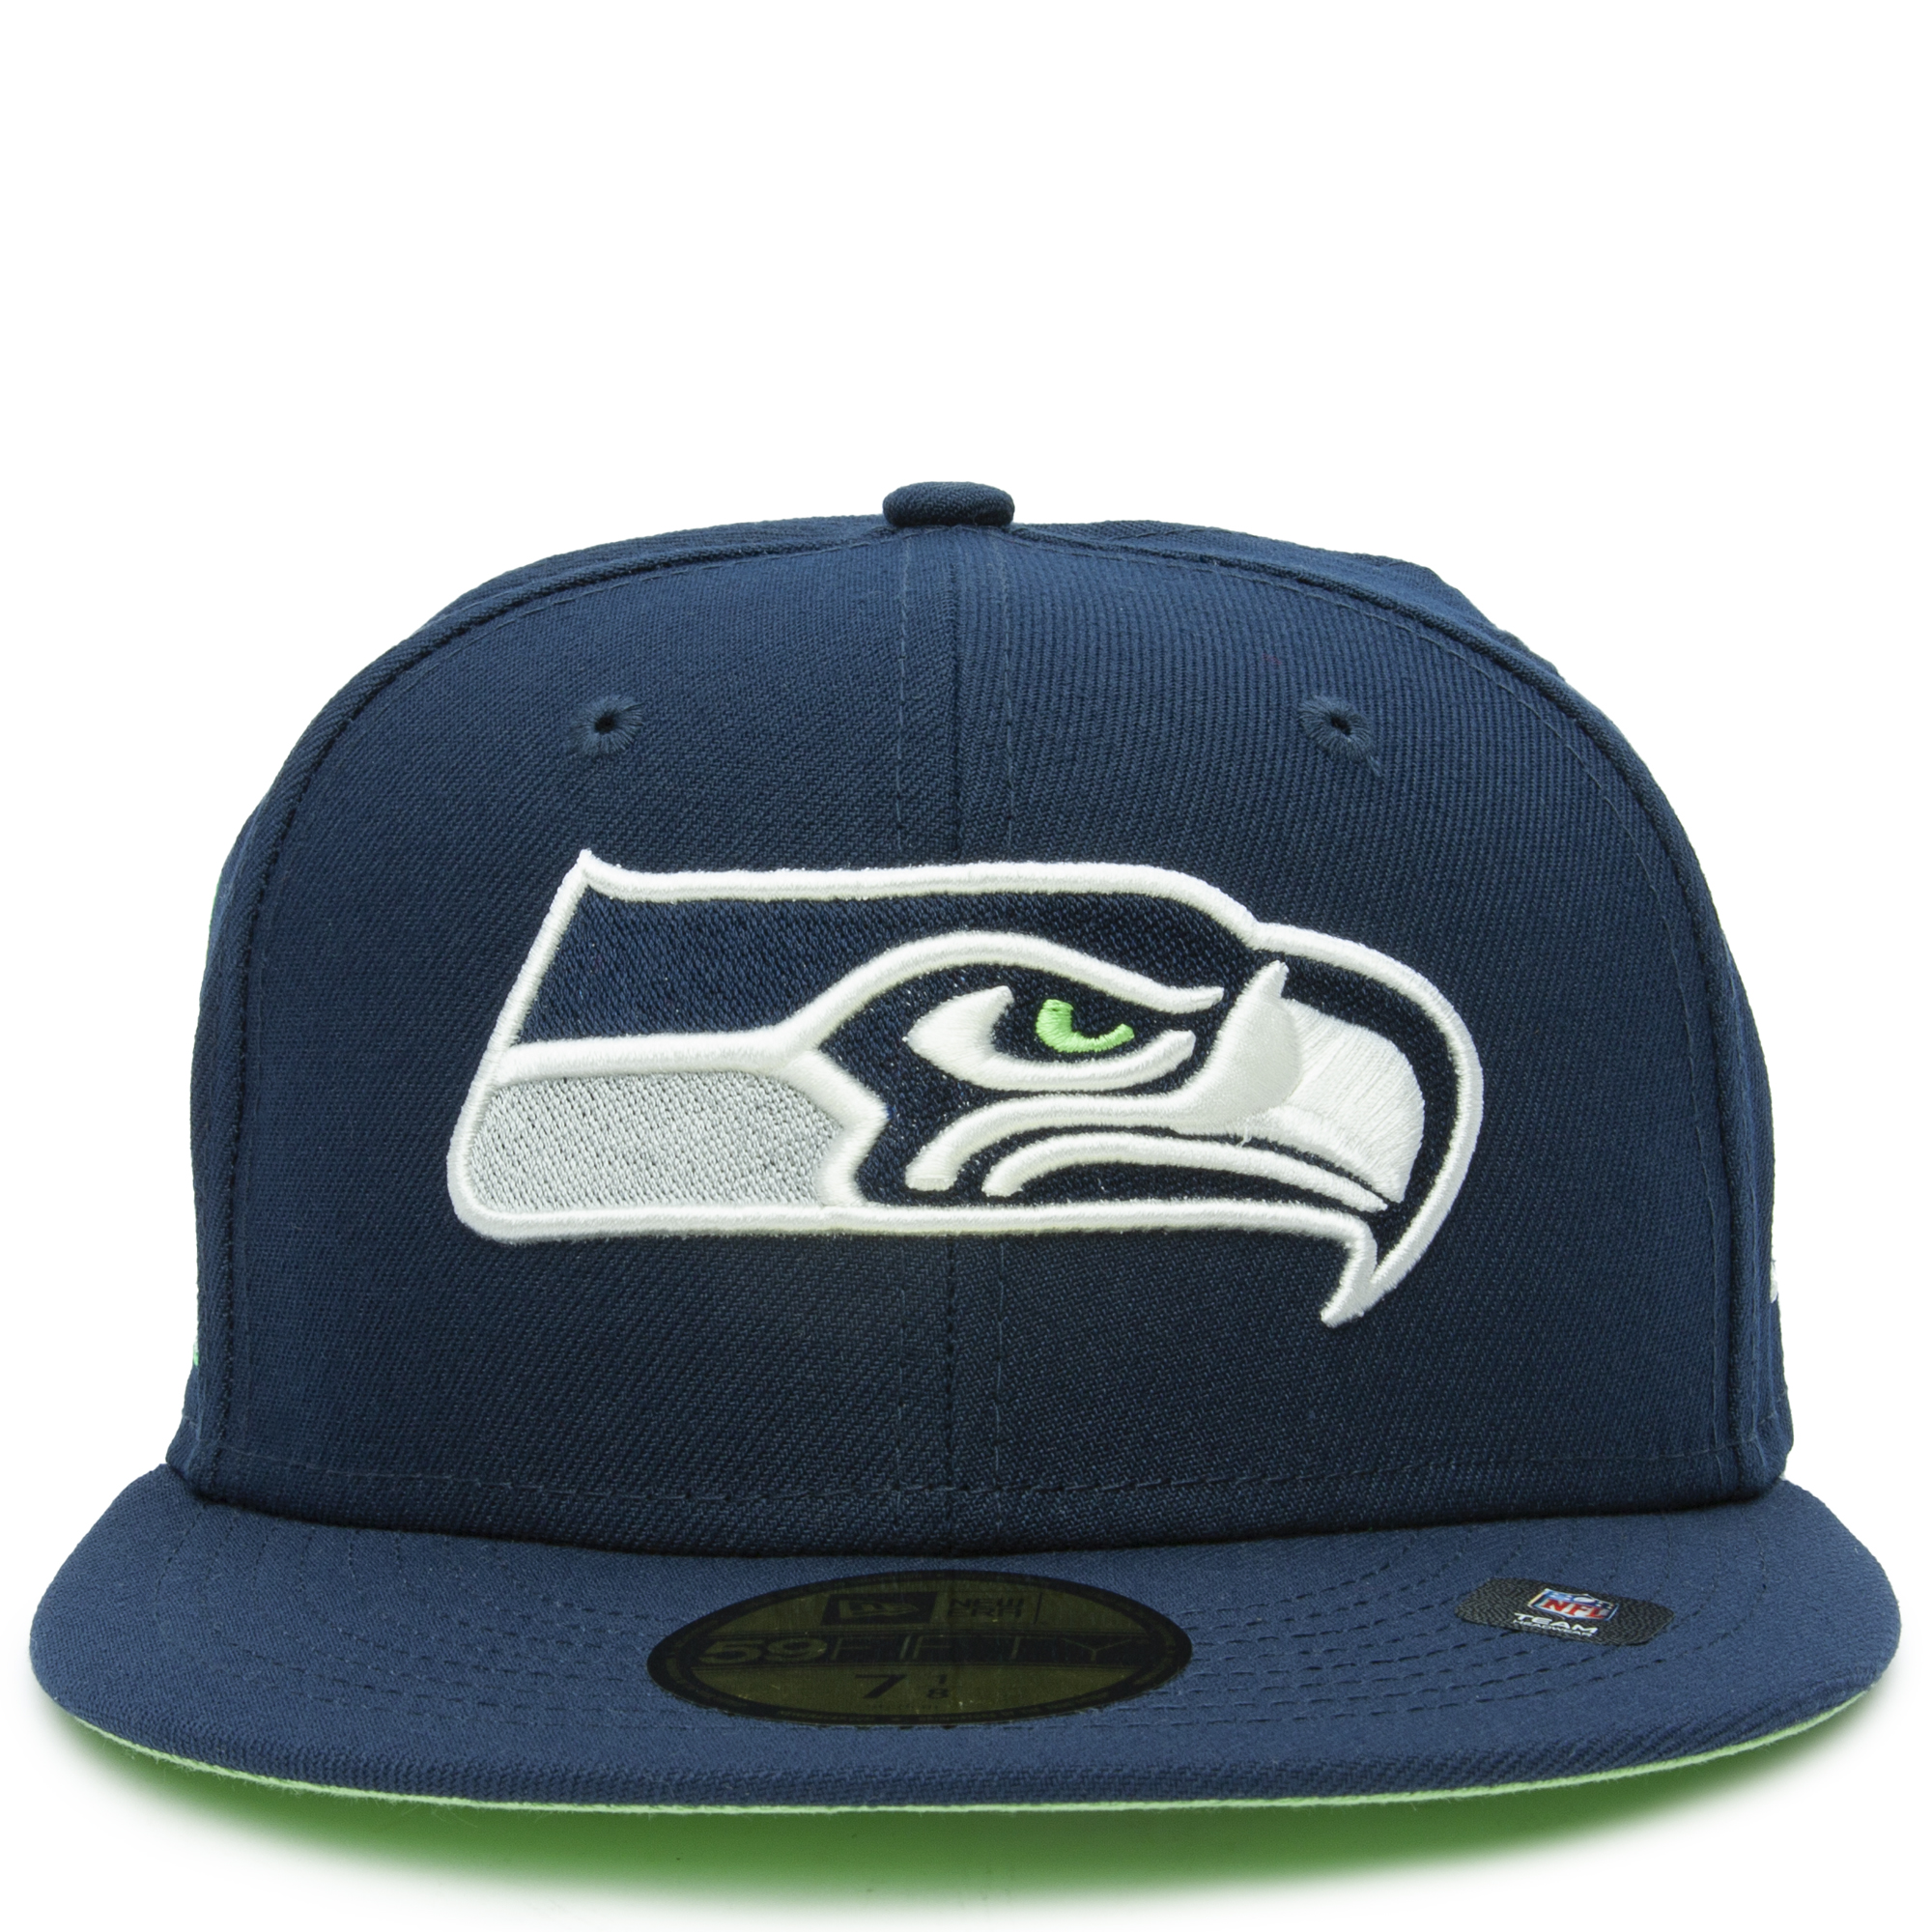 New Era Caps Seattle Seahawks 59FIFTY Fitted Hat None